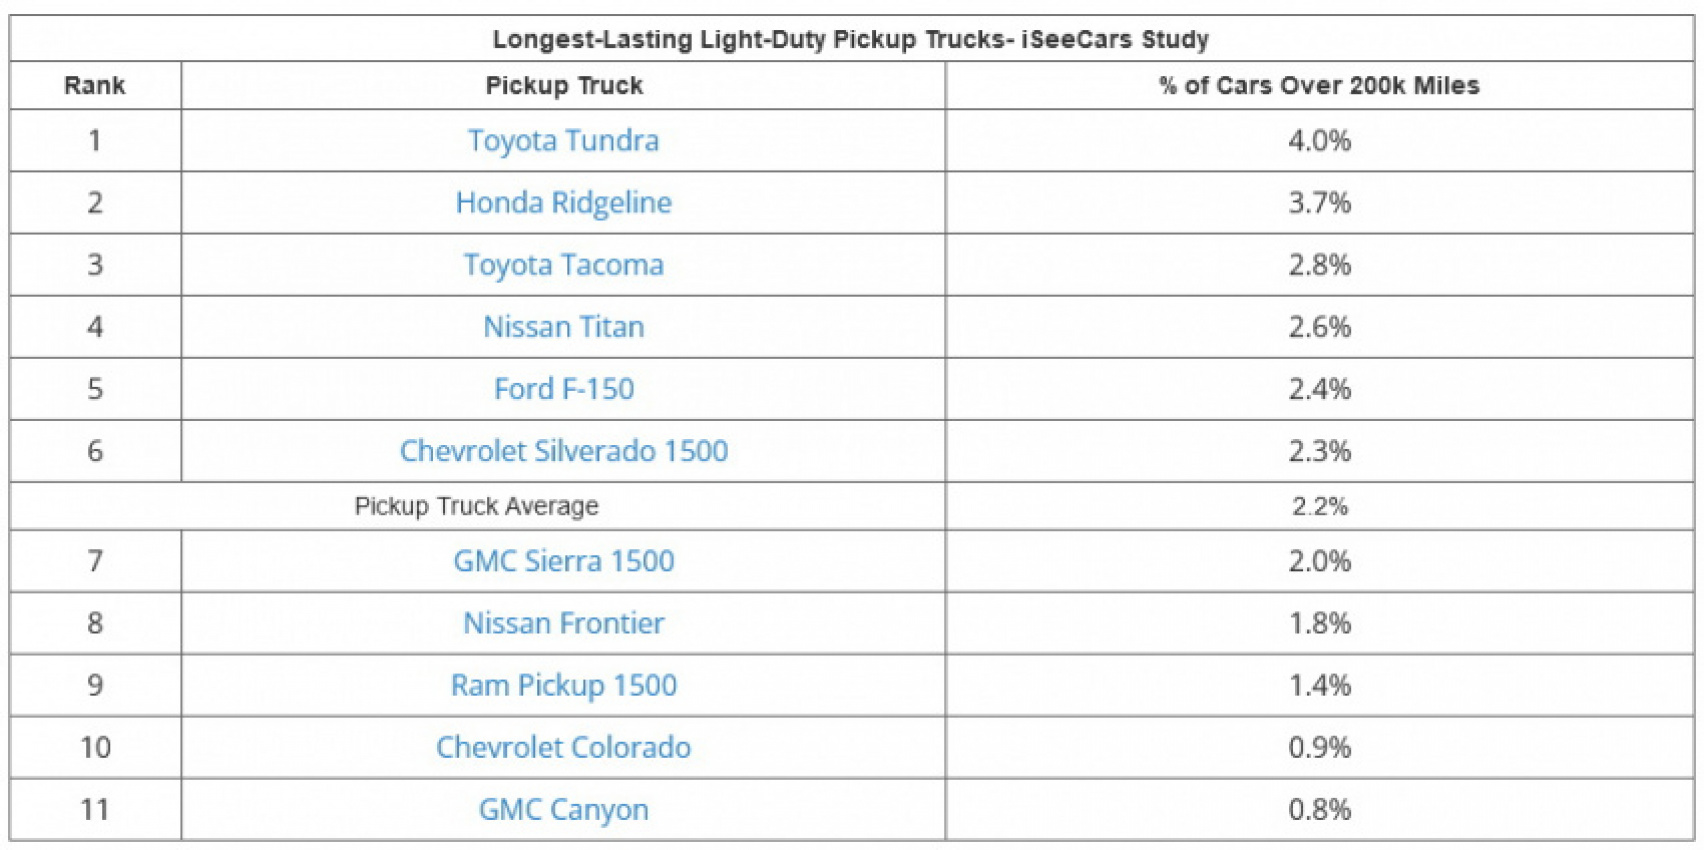 autos, cars, news, chevrolet, chevrolet suburban, ford, ford f-150, gmc yukon, honda ridgeline, nissan, nissan titan, study, toyota, toyota 4runner, toyota land cruiser, toyota sequoia, toyota tacoma, toyota tundra, these are the cars, suvs and trucks most likely to reach 200,000 miles